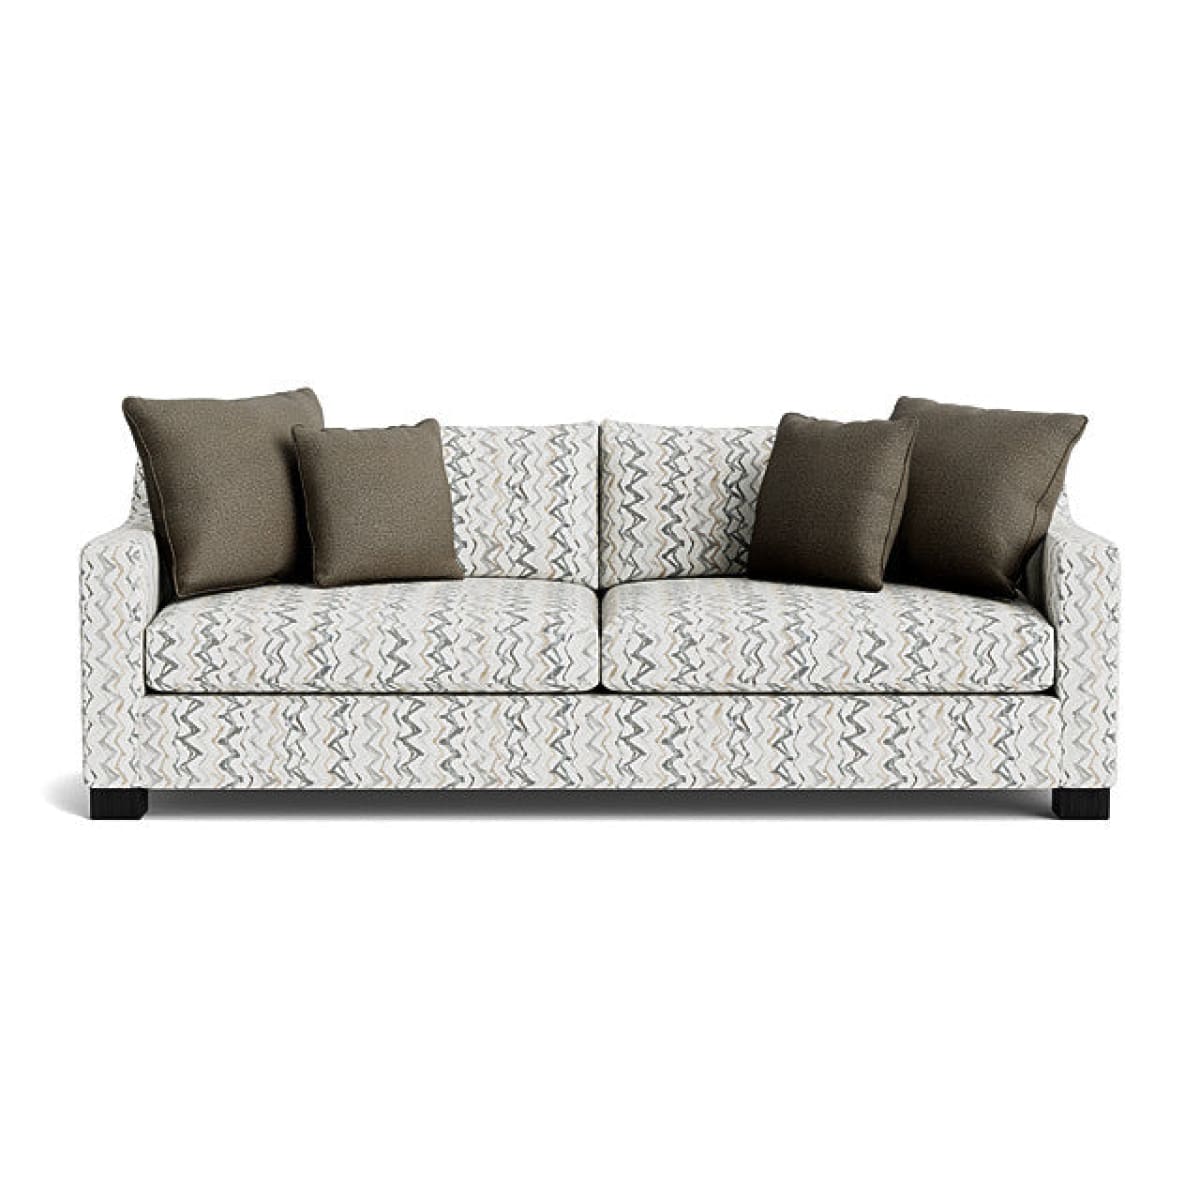 Ewing Sofa - Sectional - Tempest Windswept